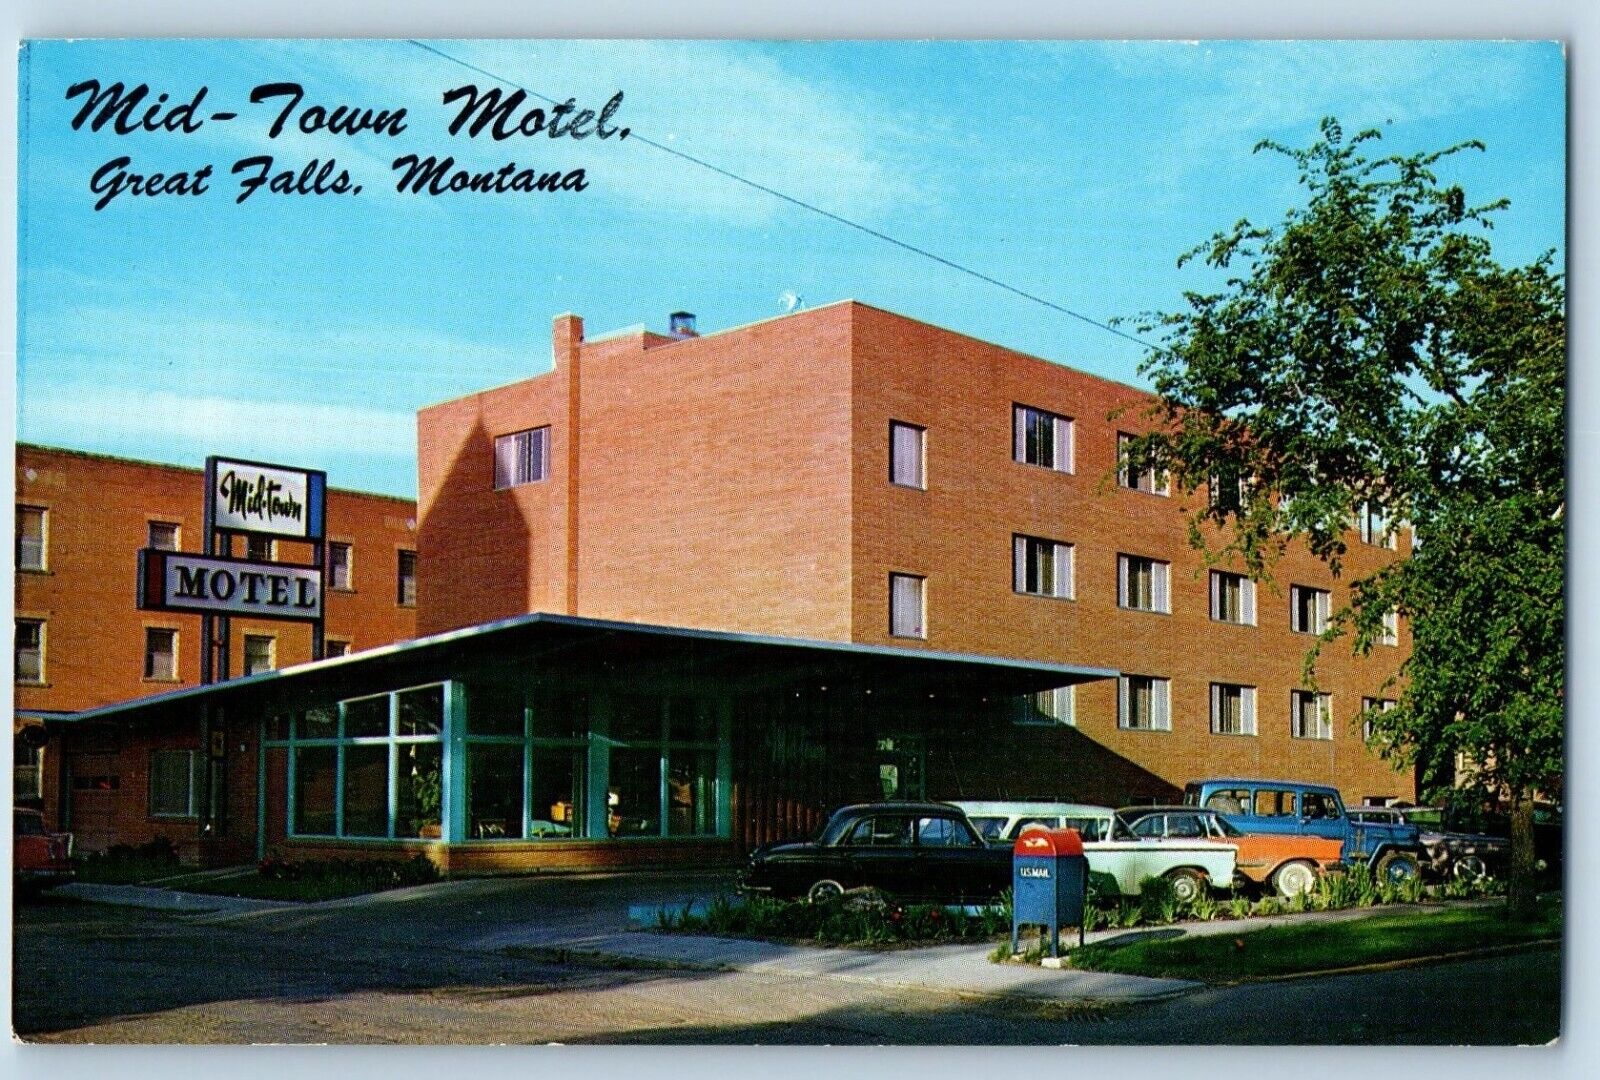 Great Falls Montana Postcard Mid-Town Motel Classic Cars Building c1960 Unposted